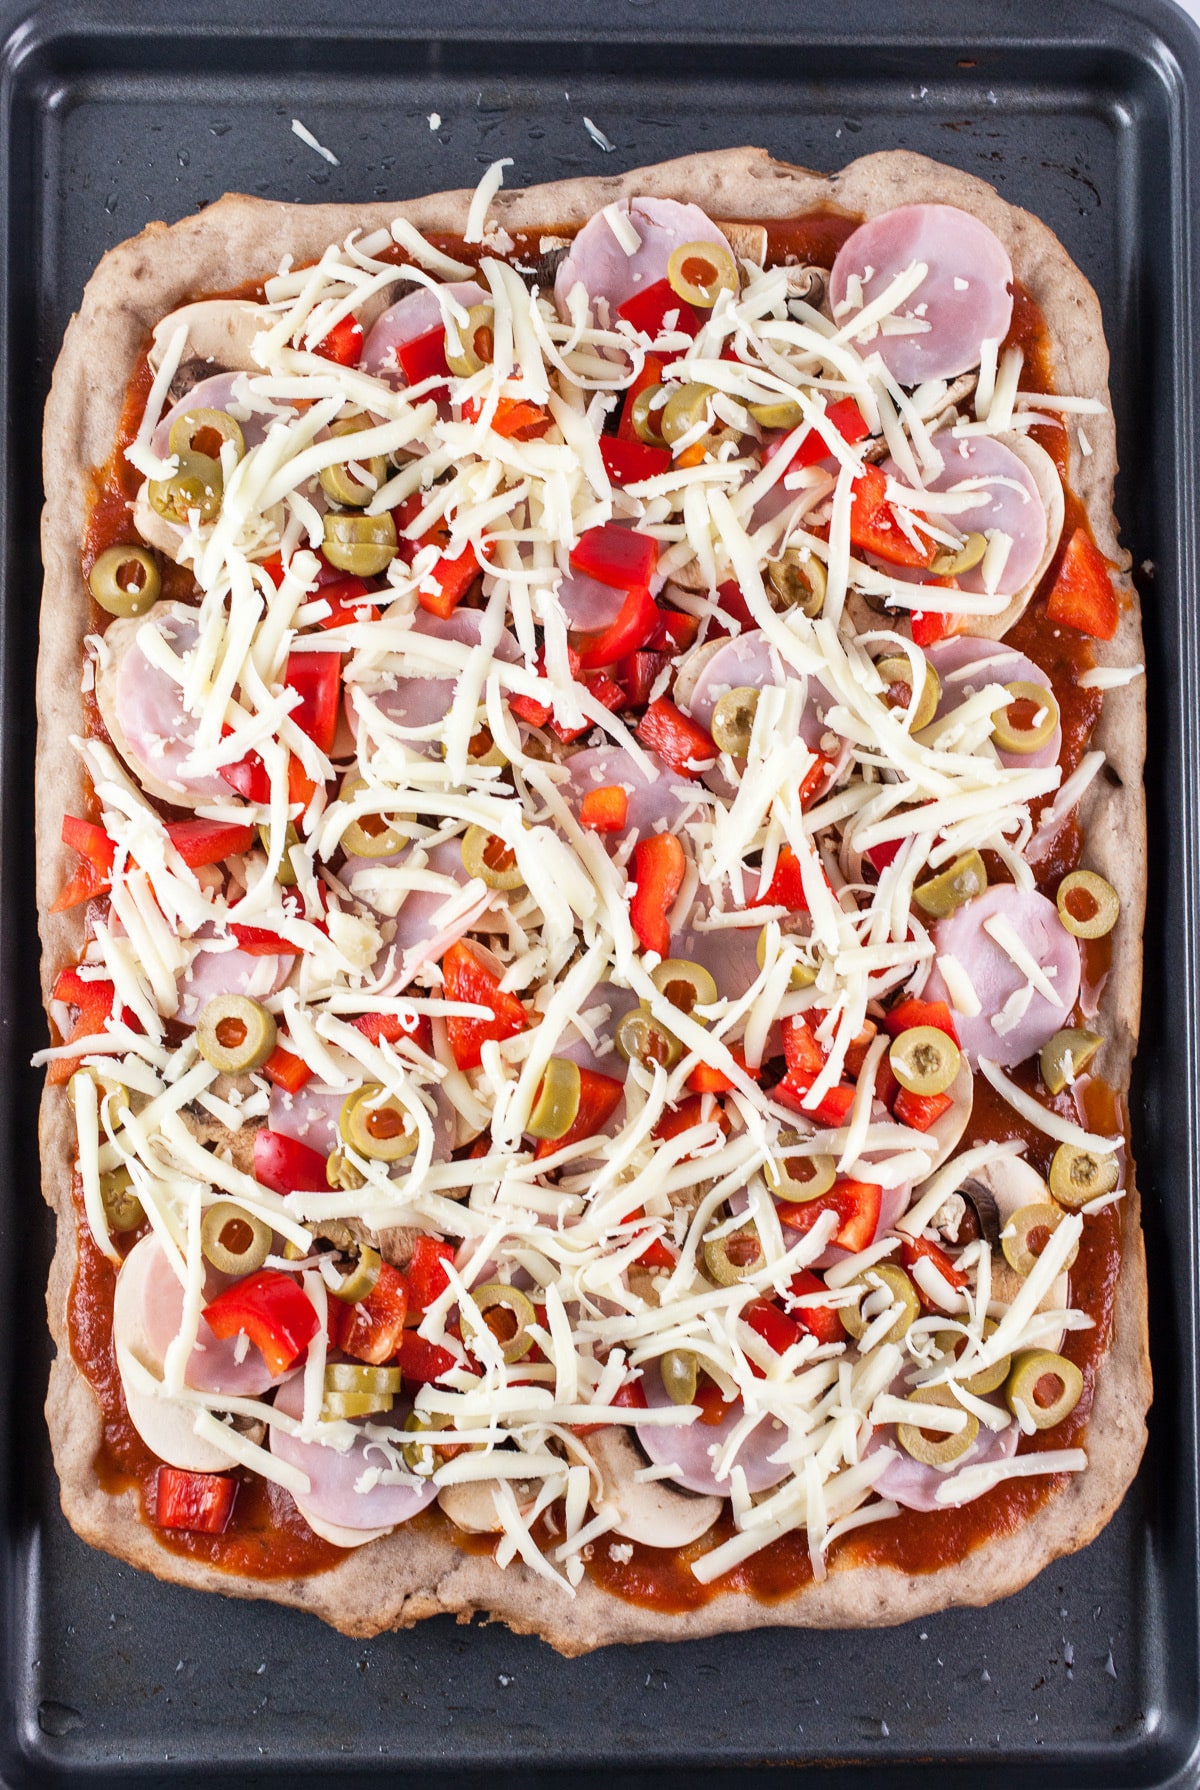 Uncooked pizza with toppings on baking sheet.